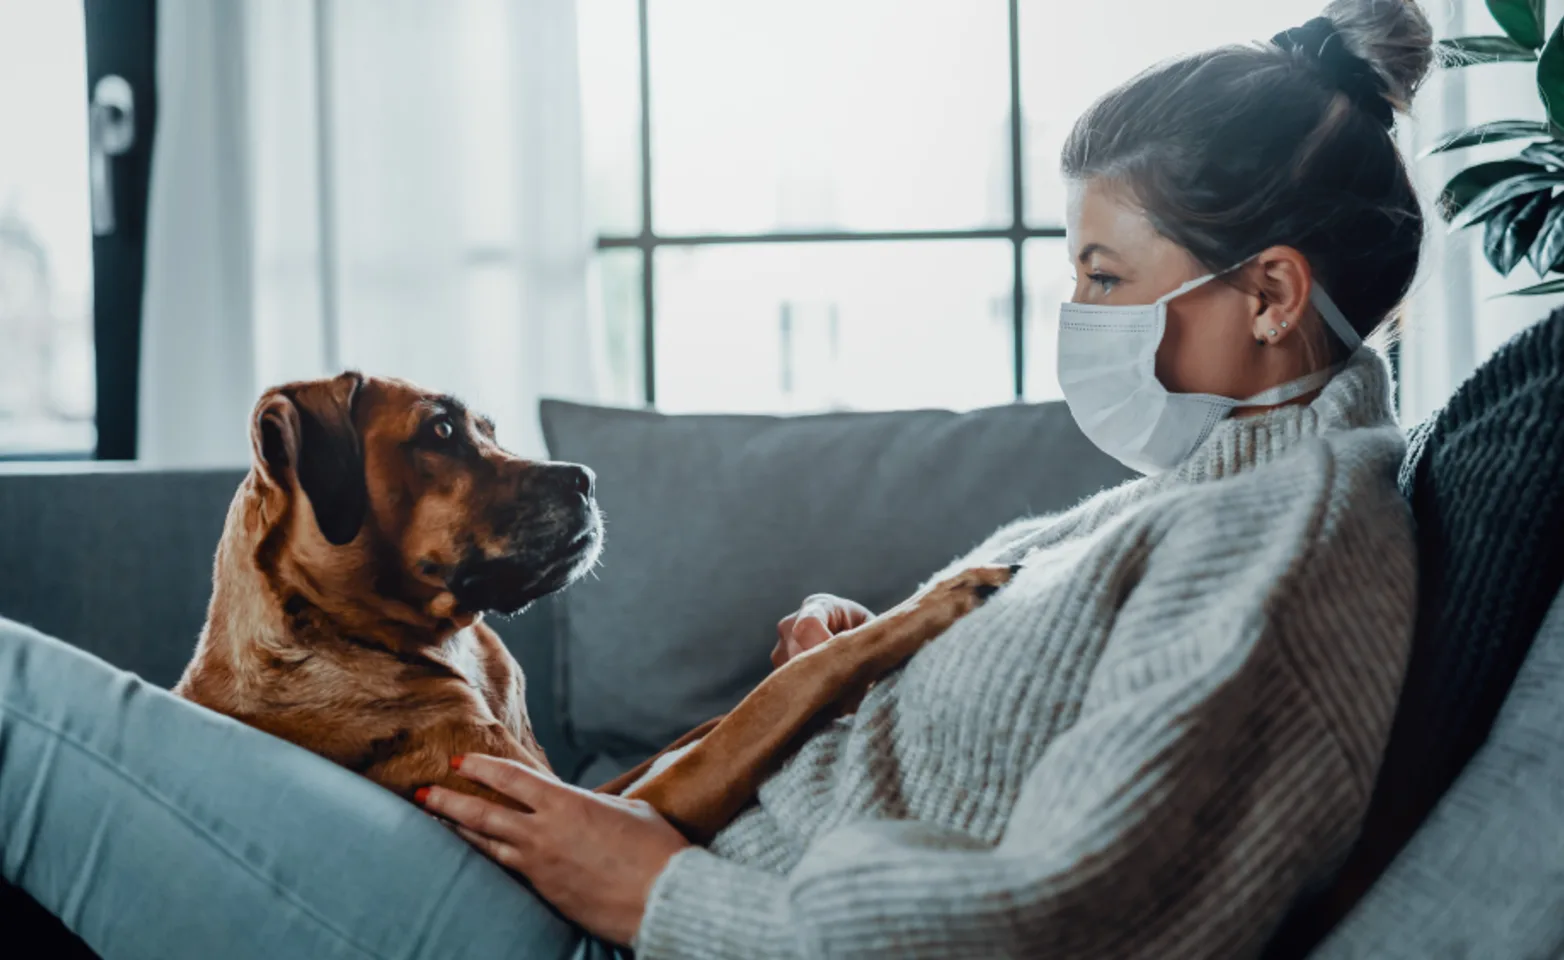 Woman wearing a mask sitting on a couch at home with a brown dog